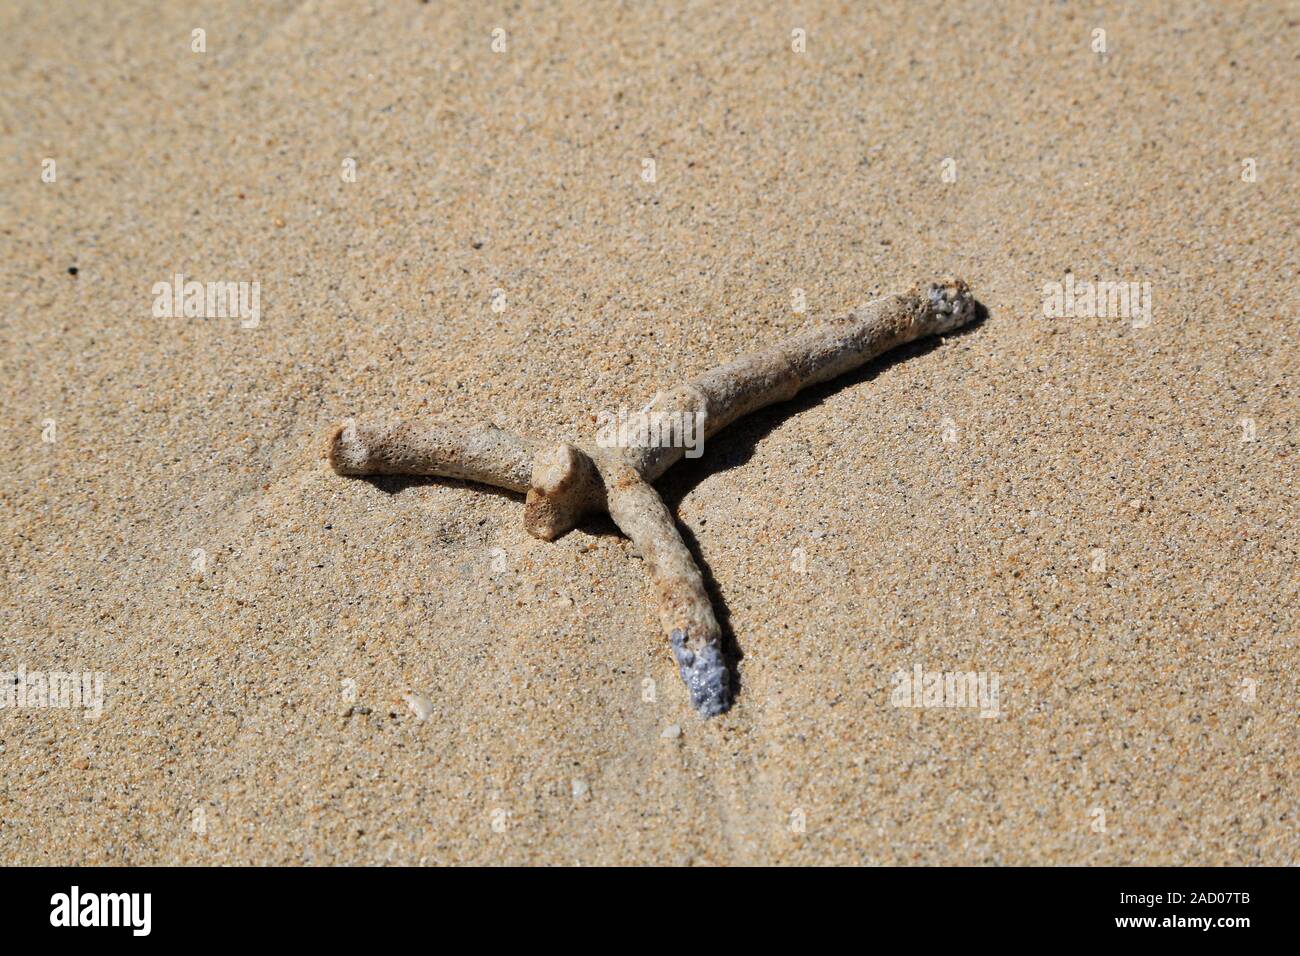 beach, sand, coral, swimmer, holiday, symbol Stock Photo